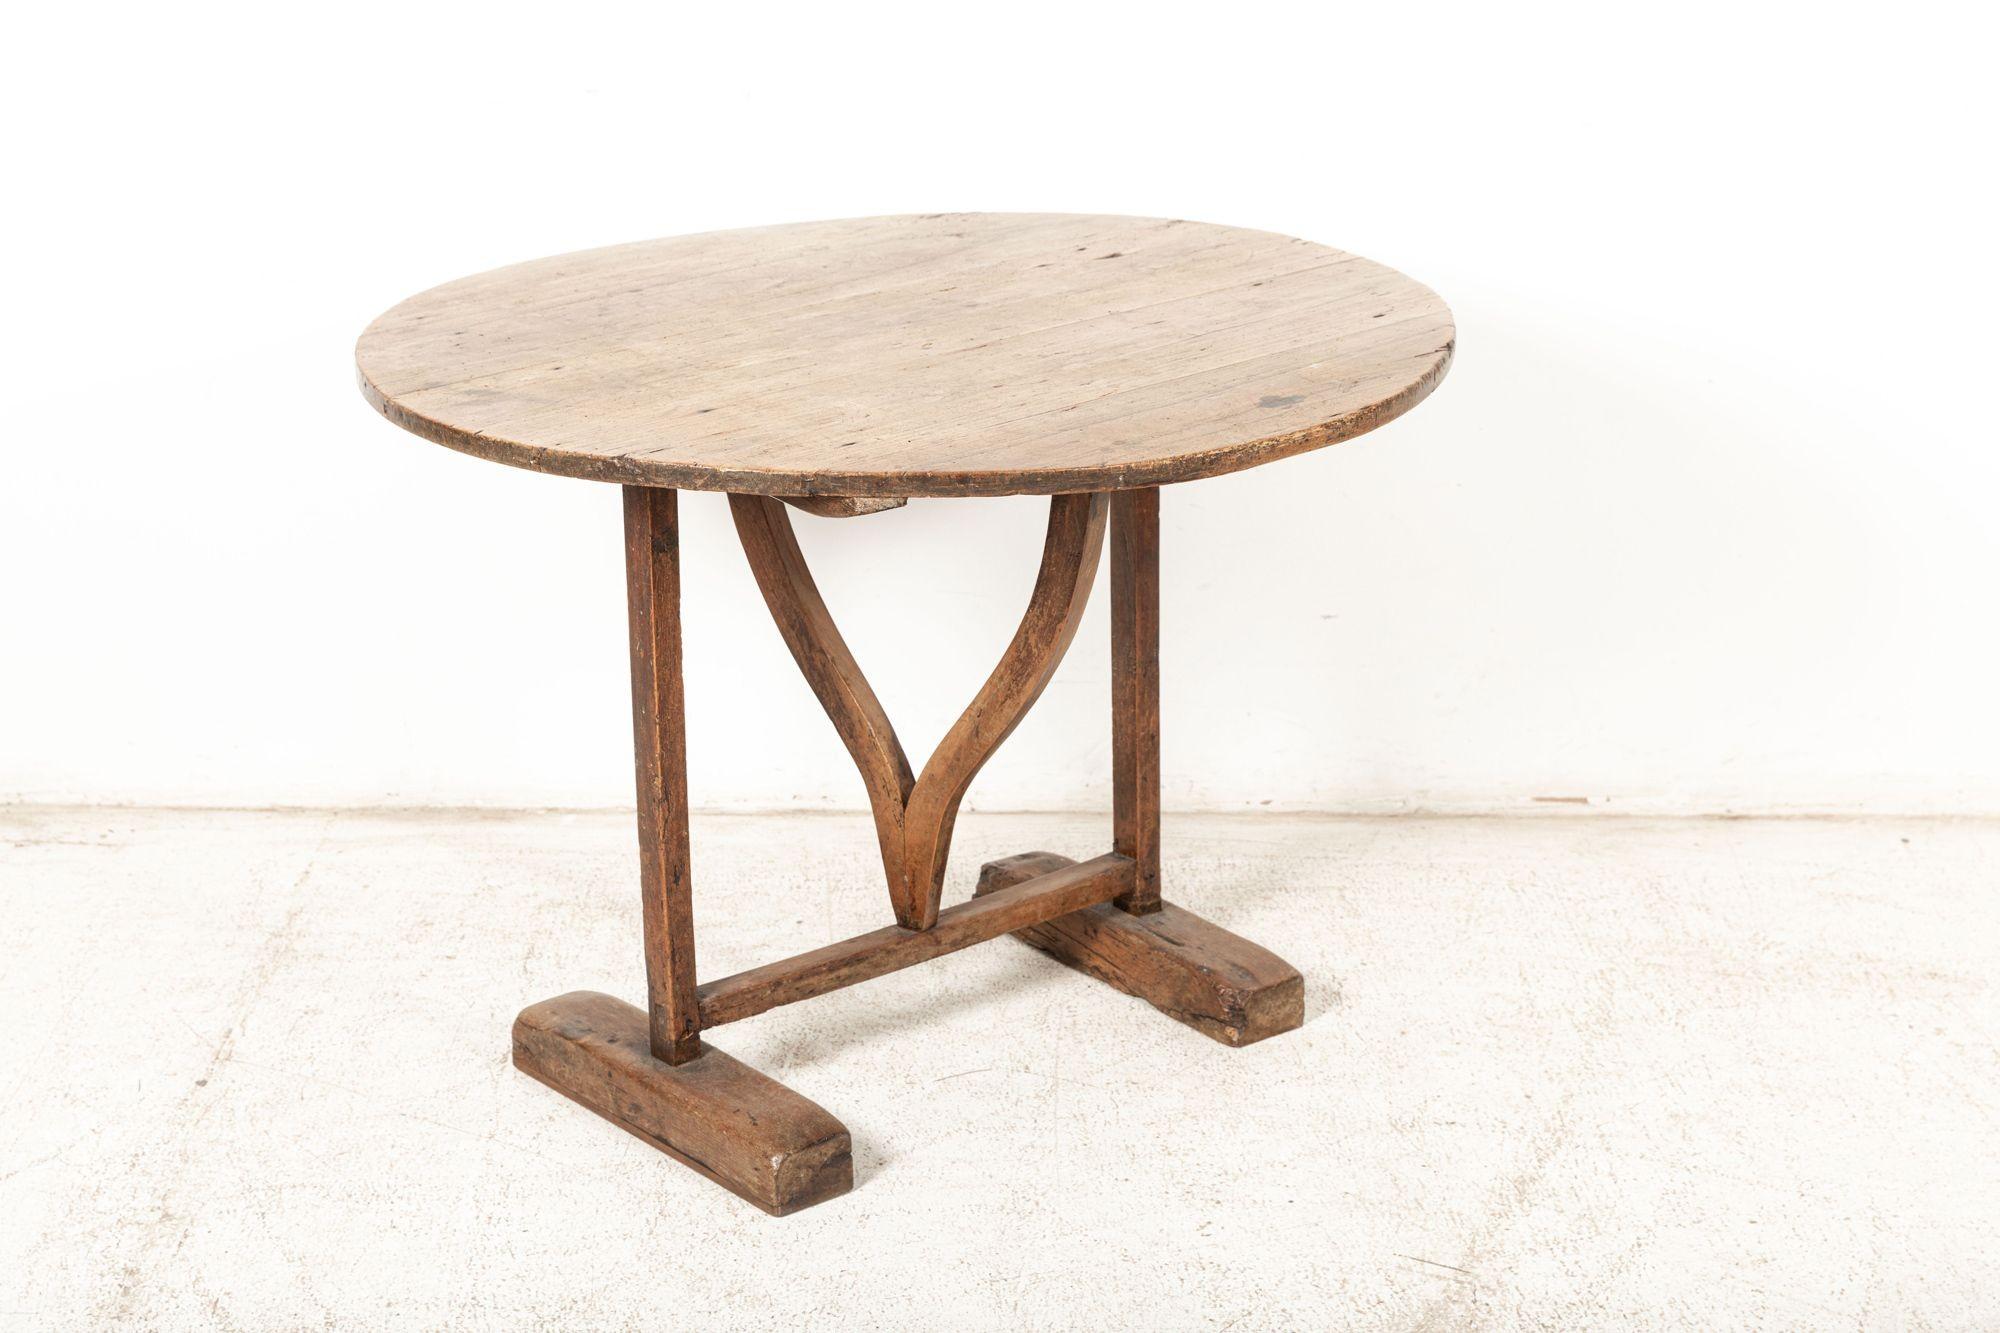 Circa 1870

19thC French vernacular fruitwood Vendange table

Great colour, form and patination

Measures: W 98 x D 96 x H 70 cm.

     